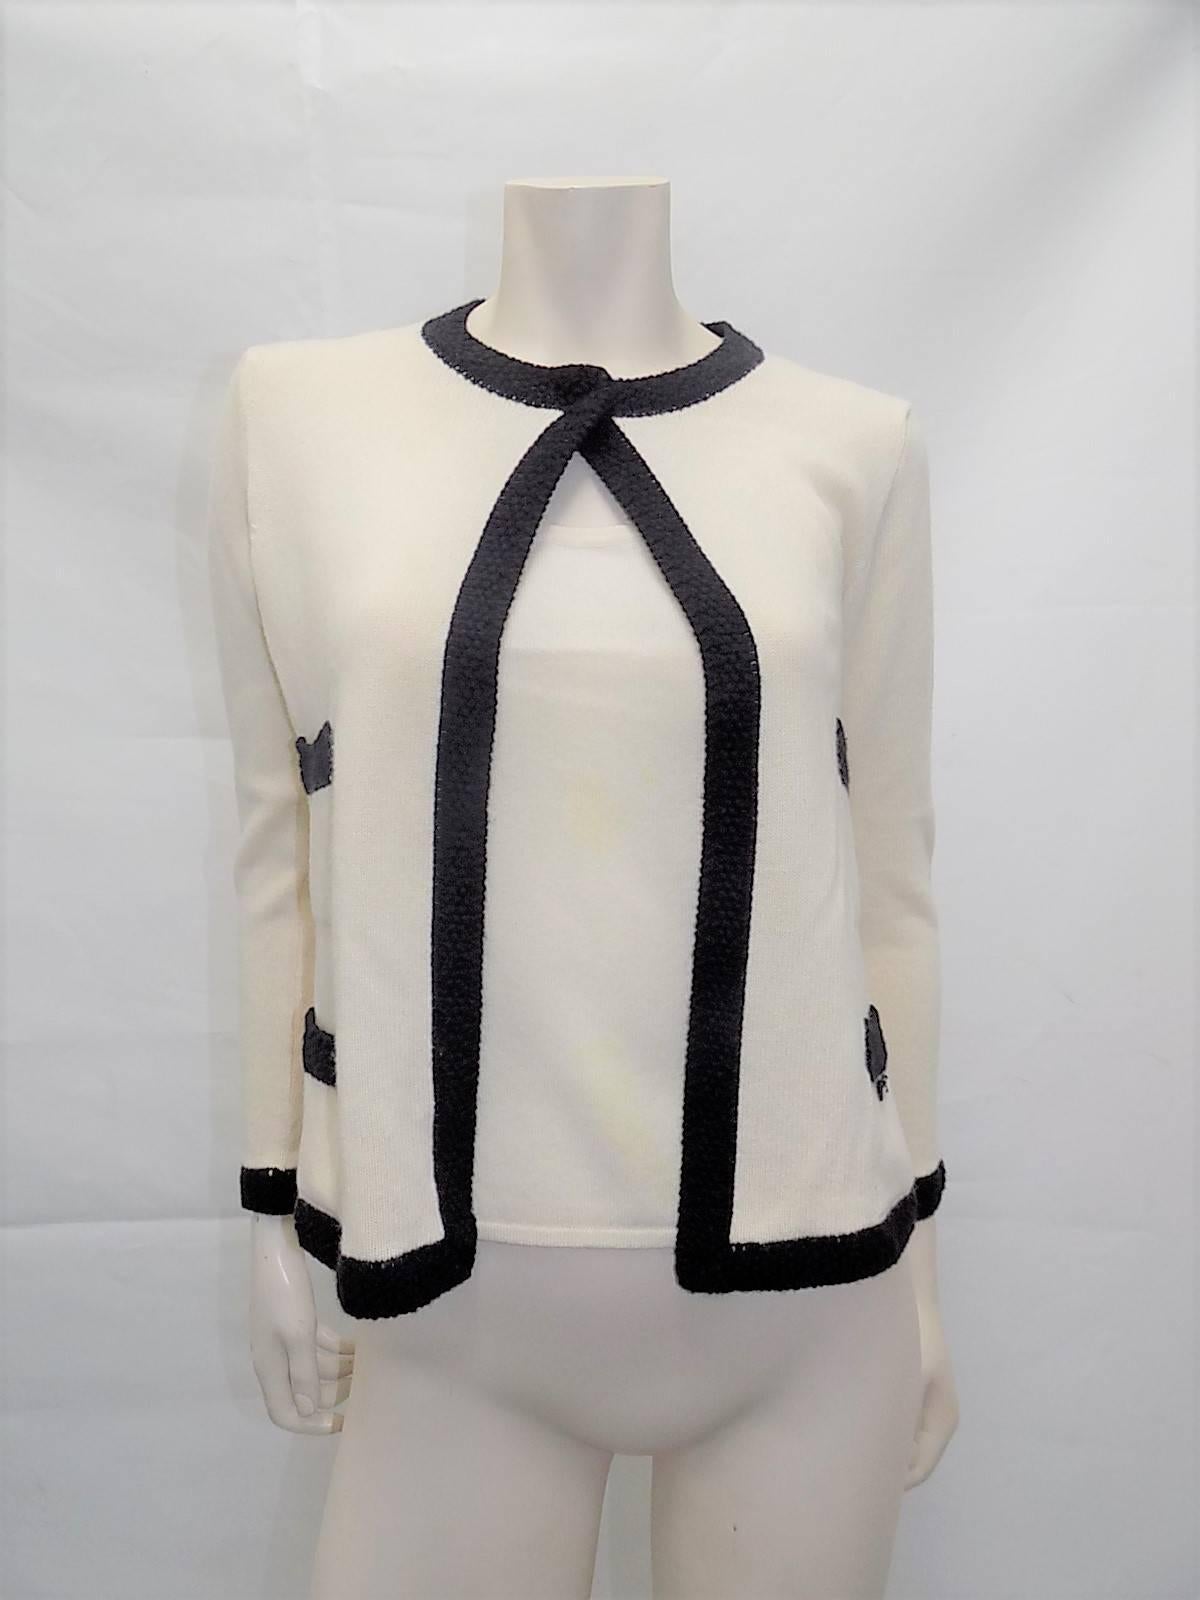 Collection 2003 in mint condition beautiful Chanel sweater set.  Ivory Cashmere with black crochet trim. Sleeveless top and sweater with one snap closure on the neckline. Four front patch pockets . Small Chanel plaque on the pocket. Size 40
Bust